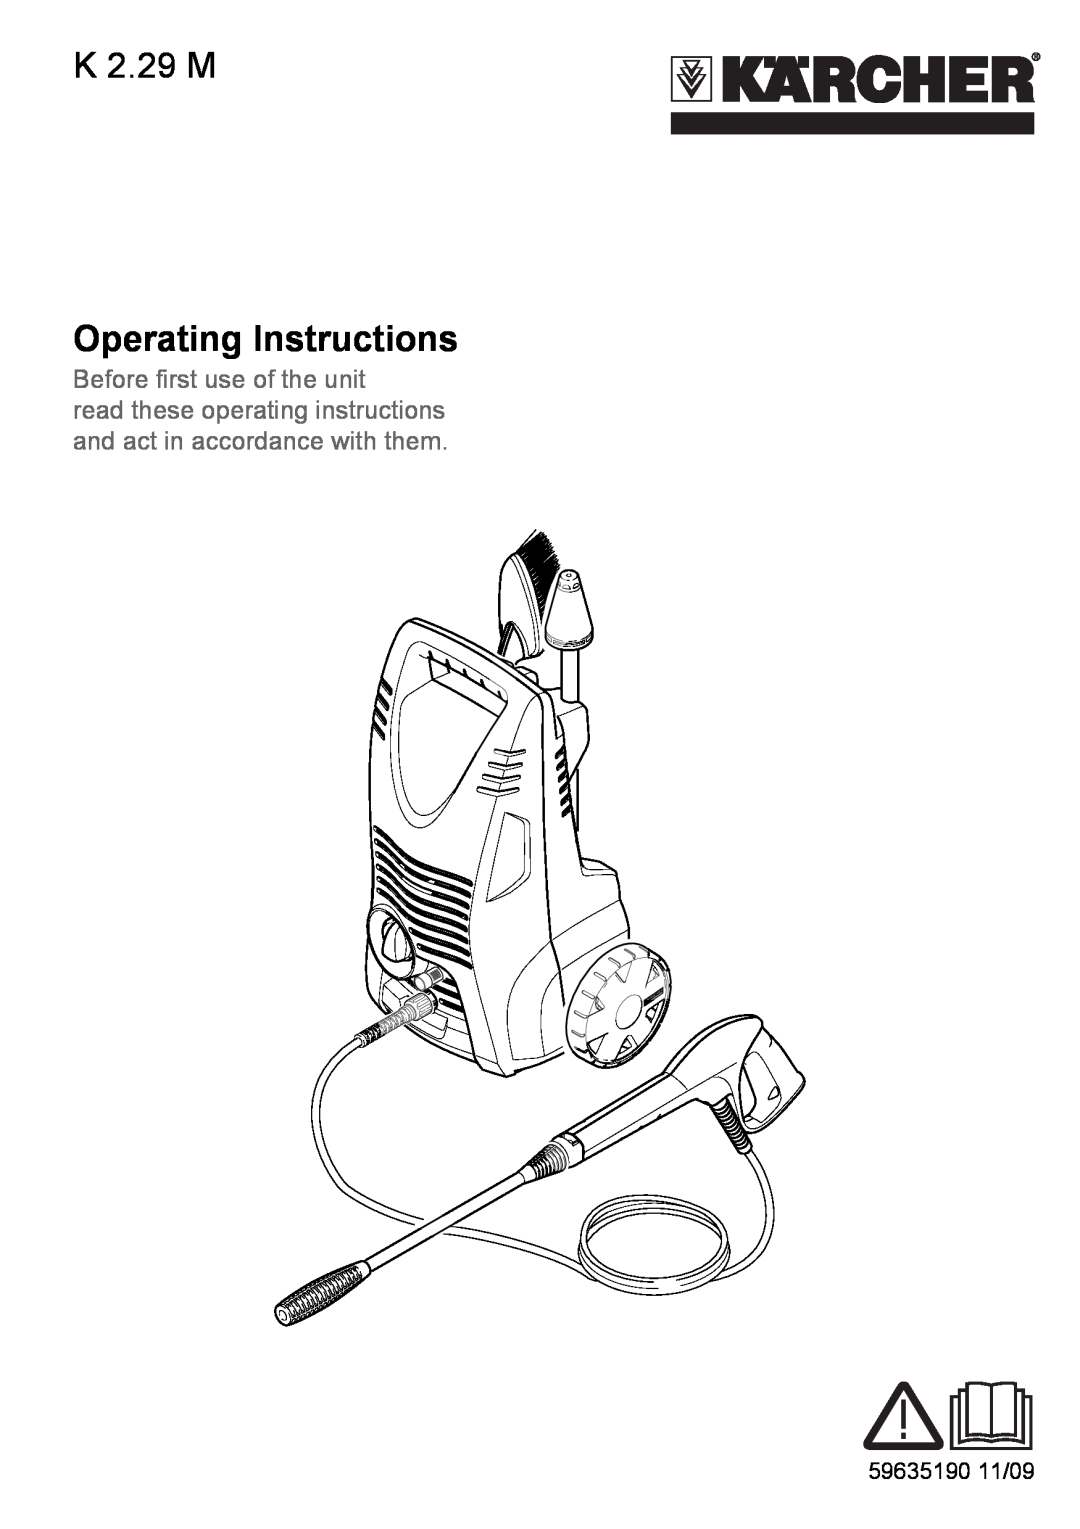 Karcher K 2.29 M manual Operating Instructions, Before first use of the unit 